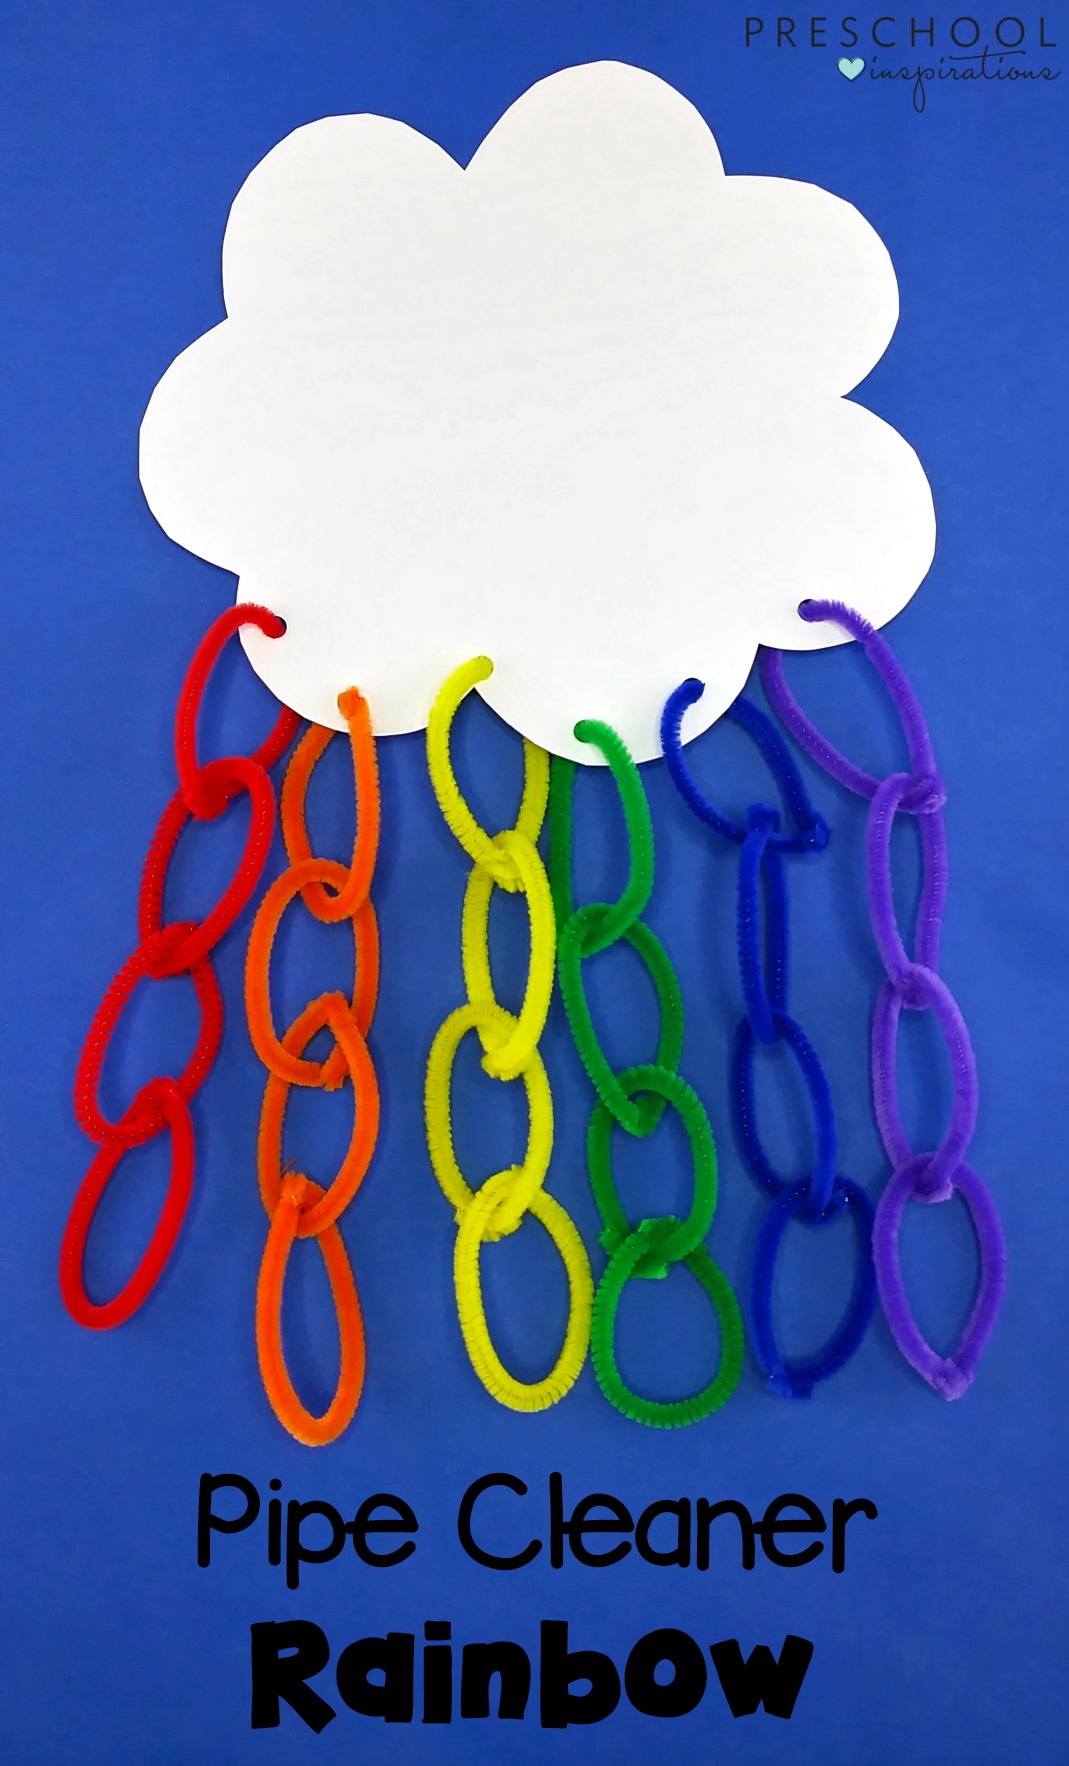 How to make a pipe cleaner rainbow craft with kids